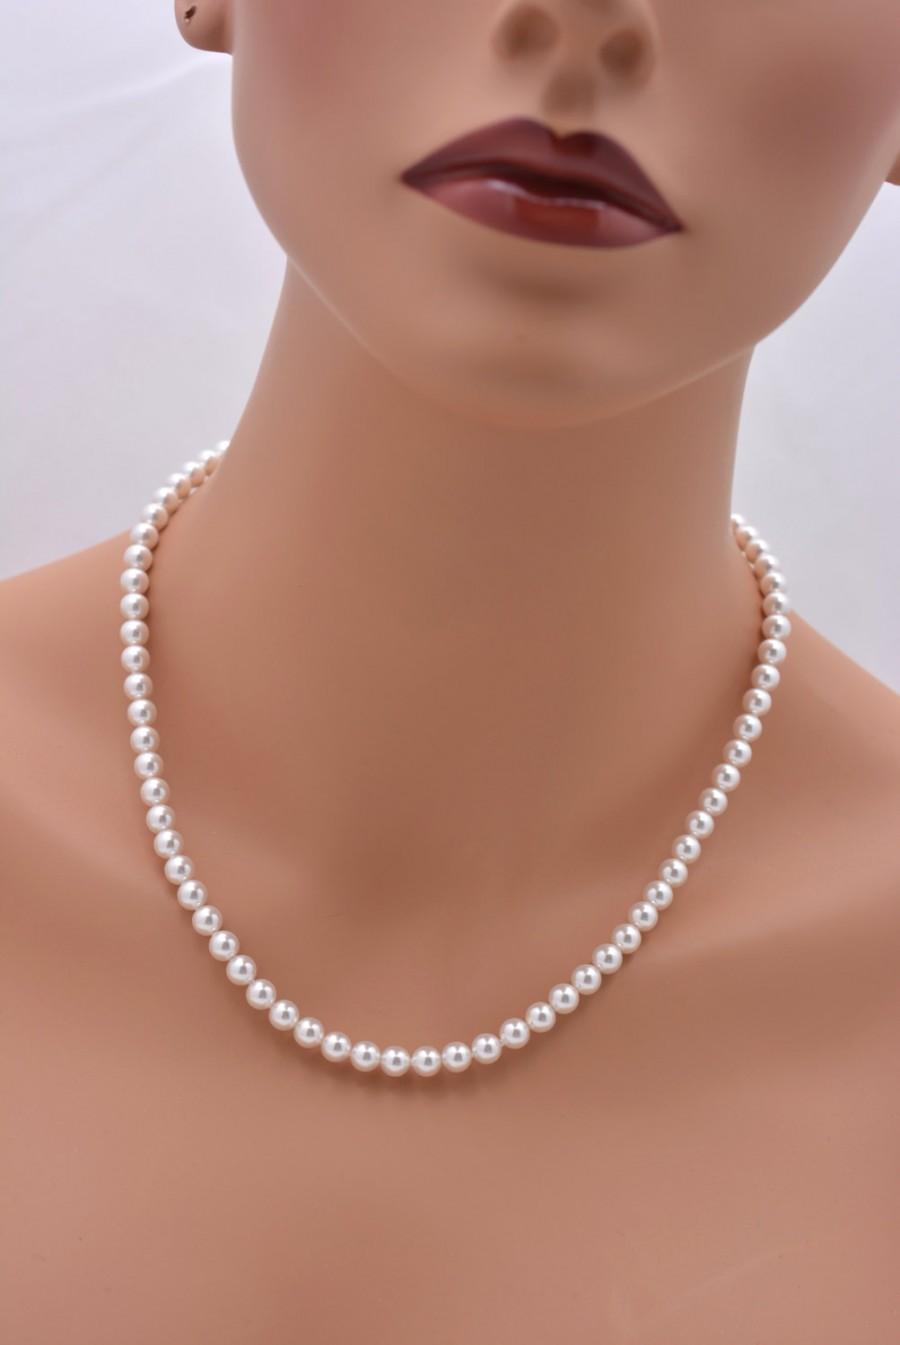 Hochzeit - Pearl Necklace, Pearl Bridesmaid Necklace, Classic Pearl Necklace, Pearl Strand Necklace, White or Ivory Pearl Necklace, 6mm Pearl 0259